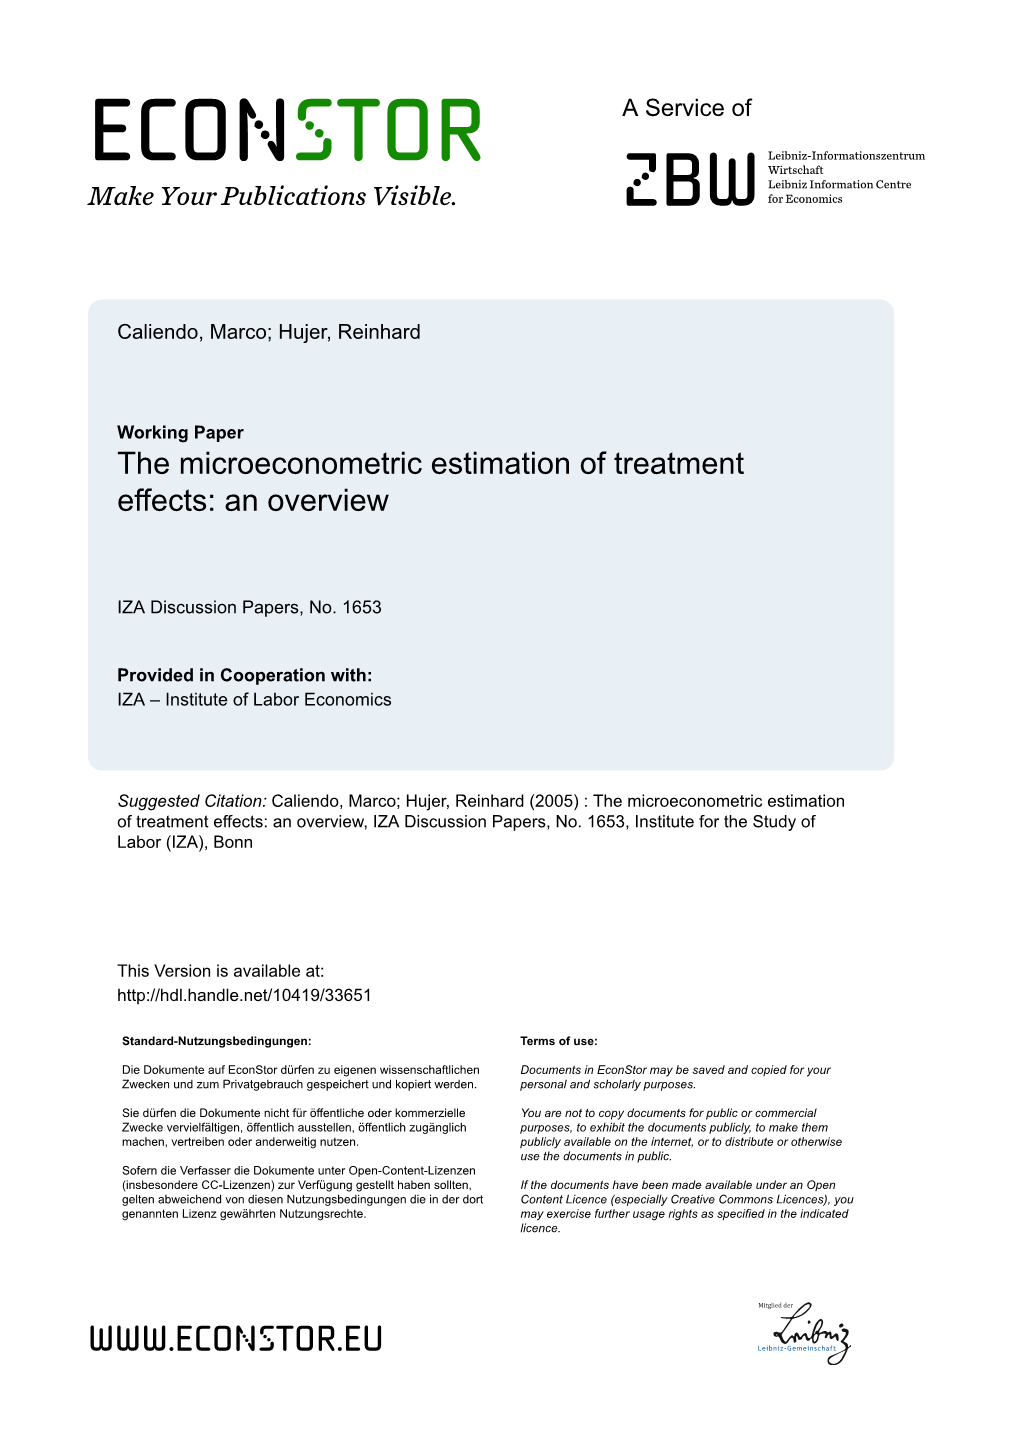 The Microeconometric Estimation of Treatment Effects: an Overview